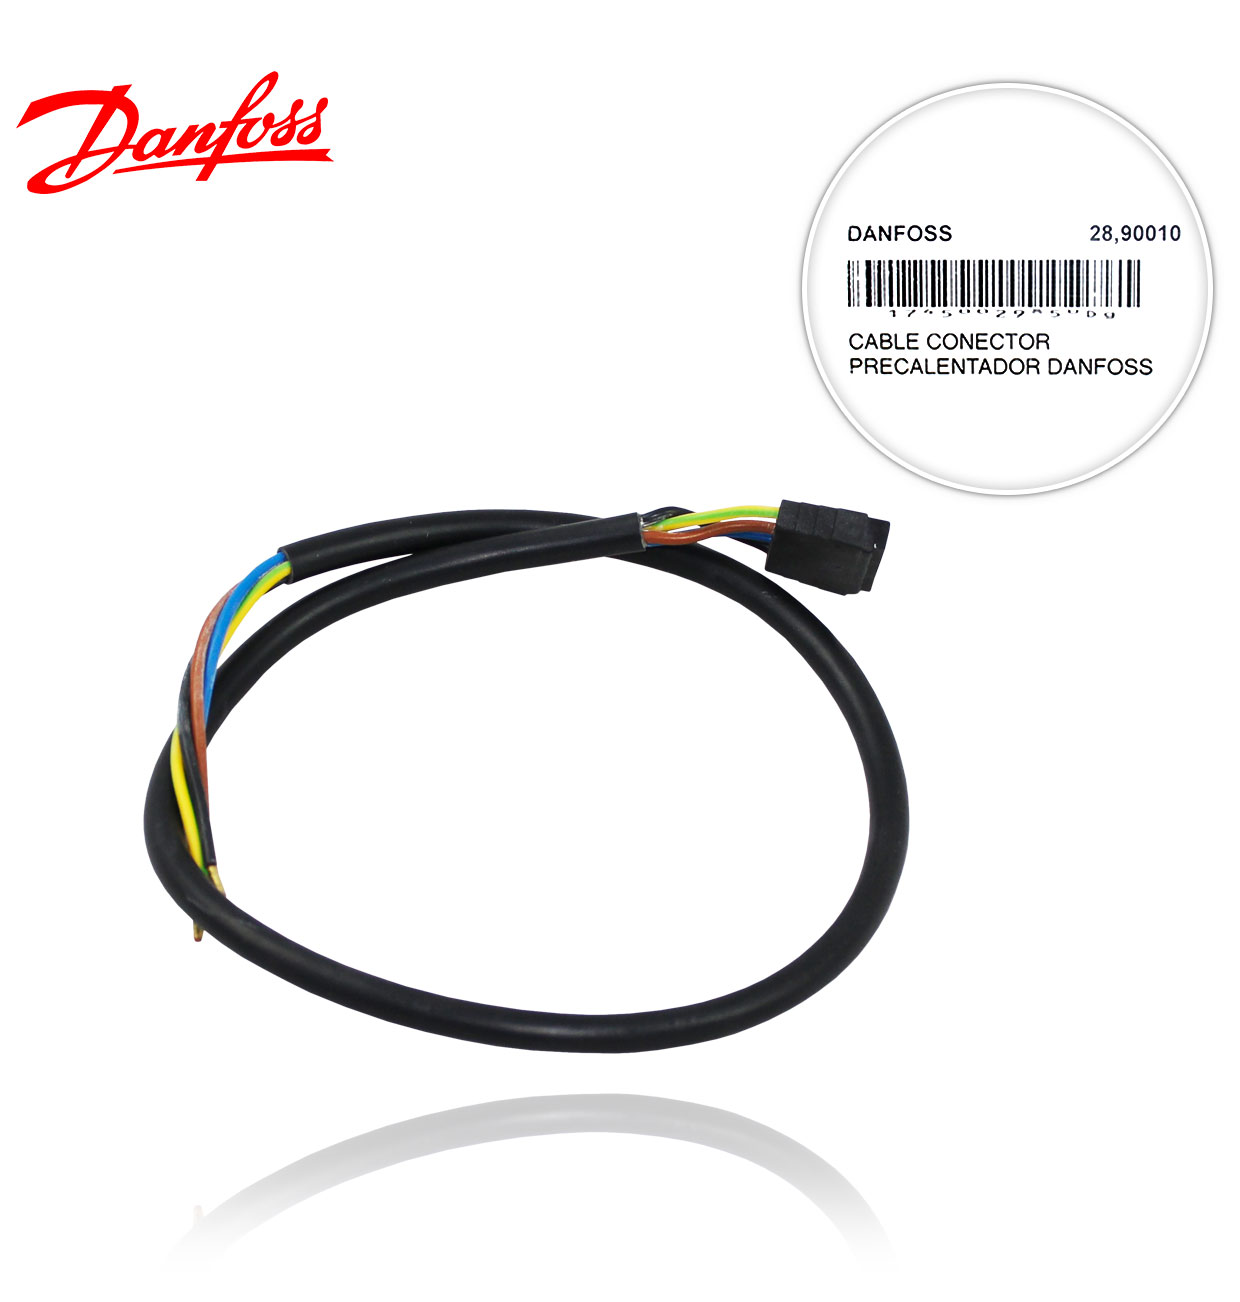 030N6043 DANFOSS PREHEATER CONNECTOR CABLE